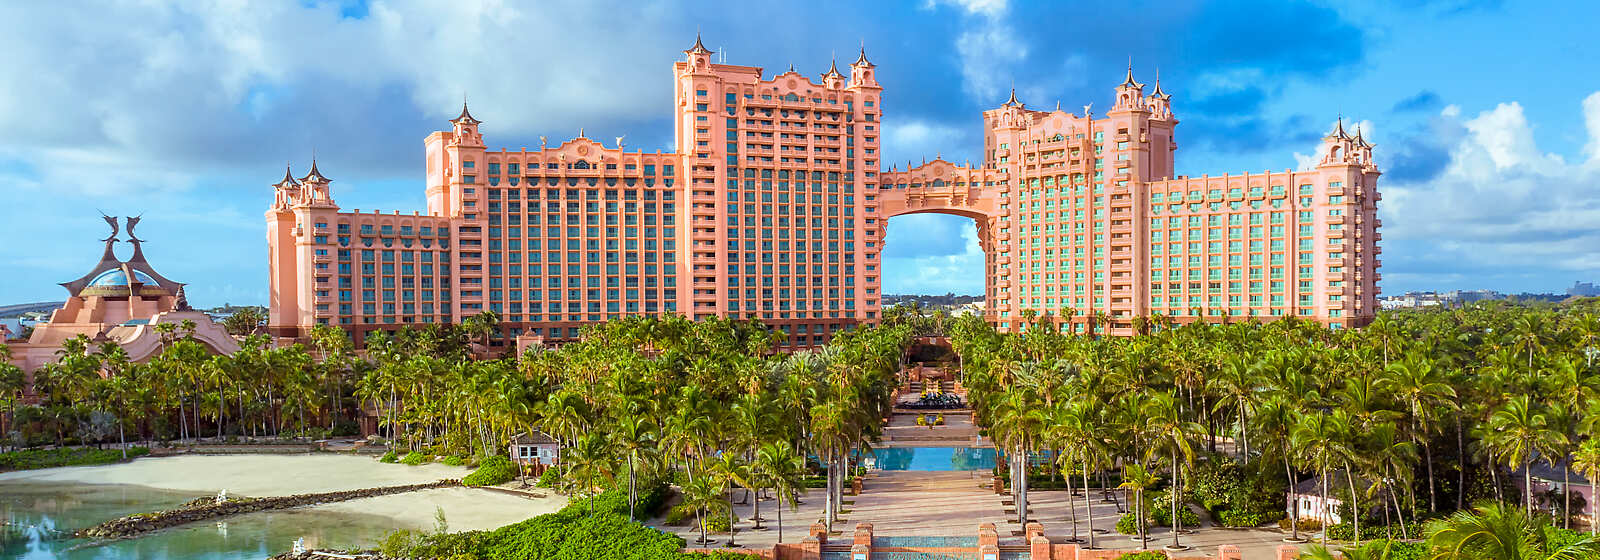 The majestic and iconic The Royal is the center of Atlantis Paradise Island